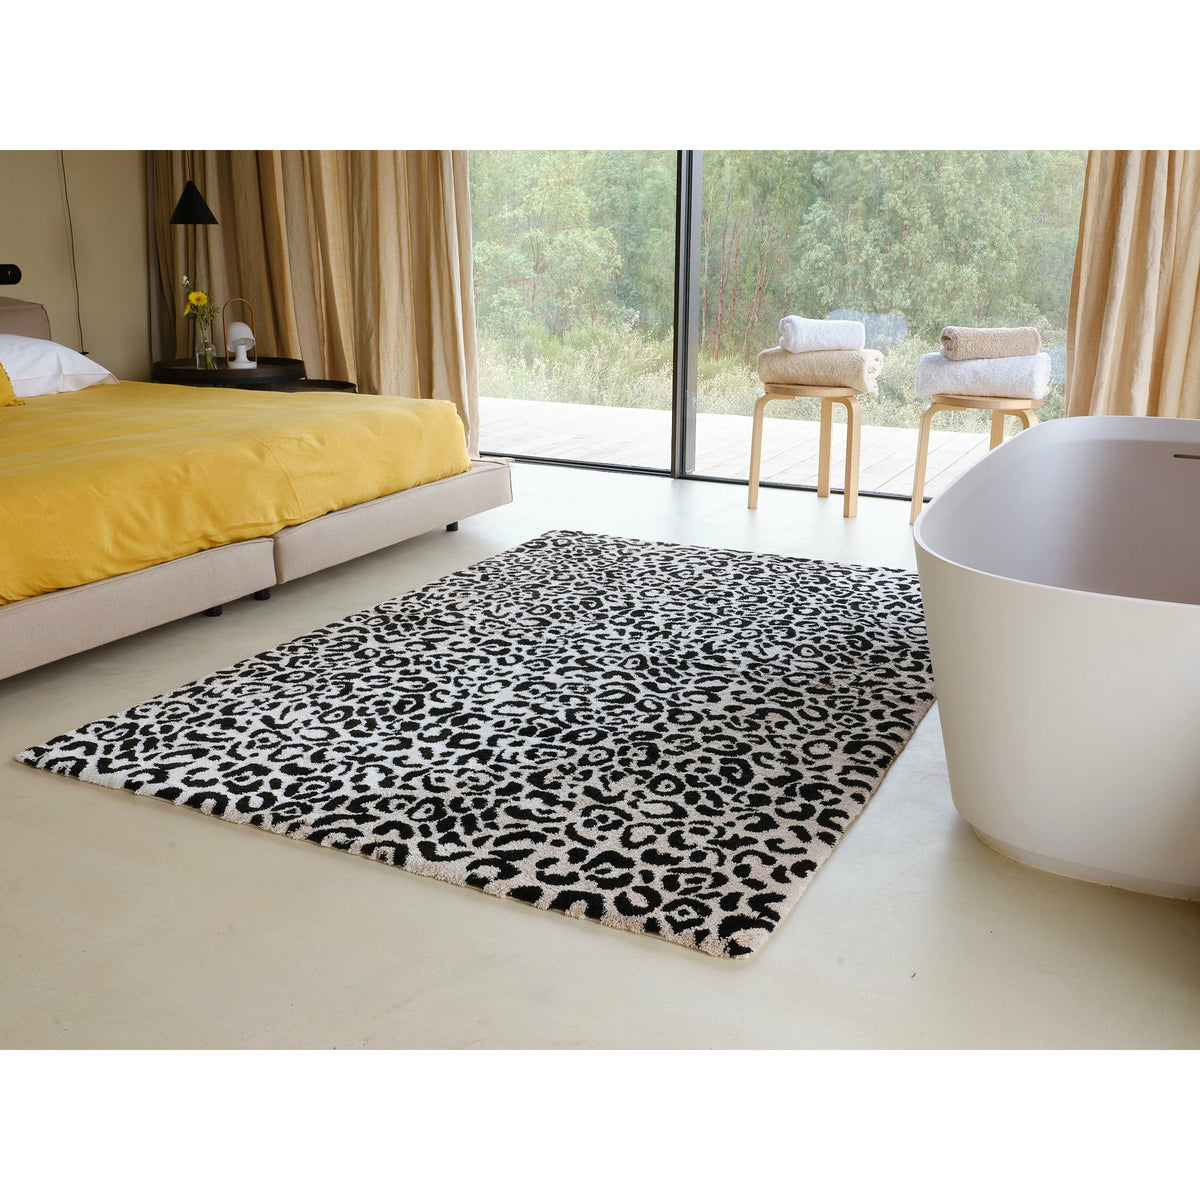 Abyss Habidecor Leopard Bath and Area Rugs Lifestyle 1 Fine Linens